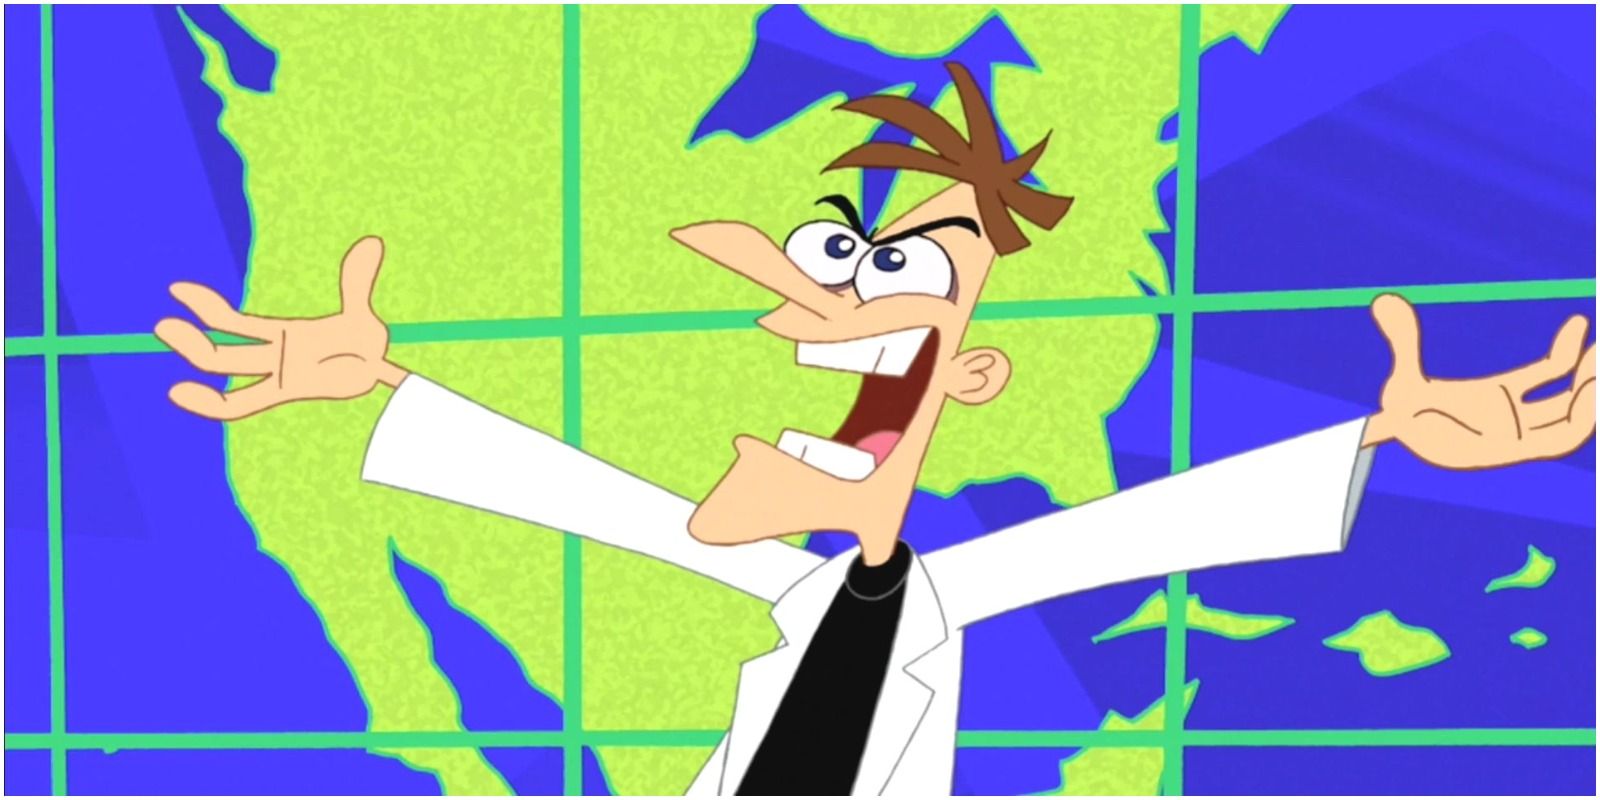 Doctor Doofenshmirtz laughing in front of big globe from Phineas and Ferb.